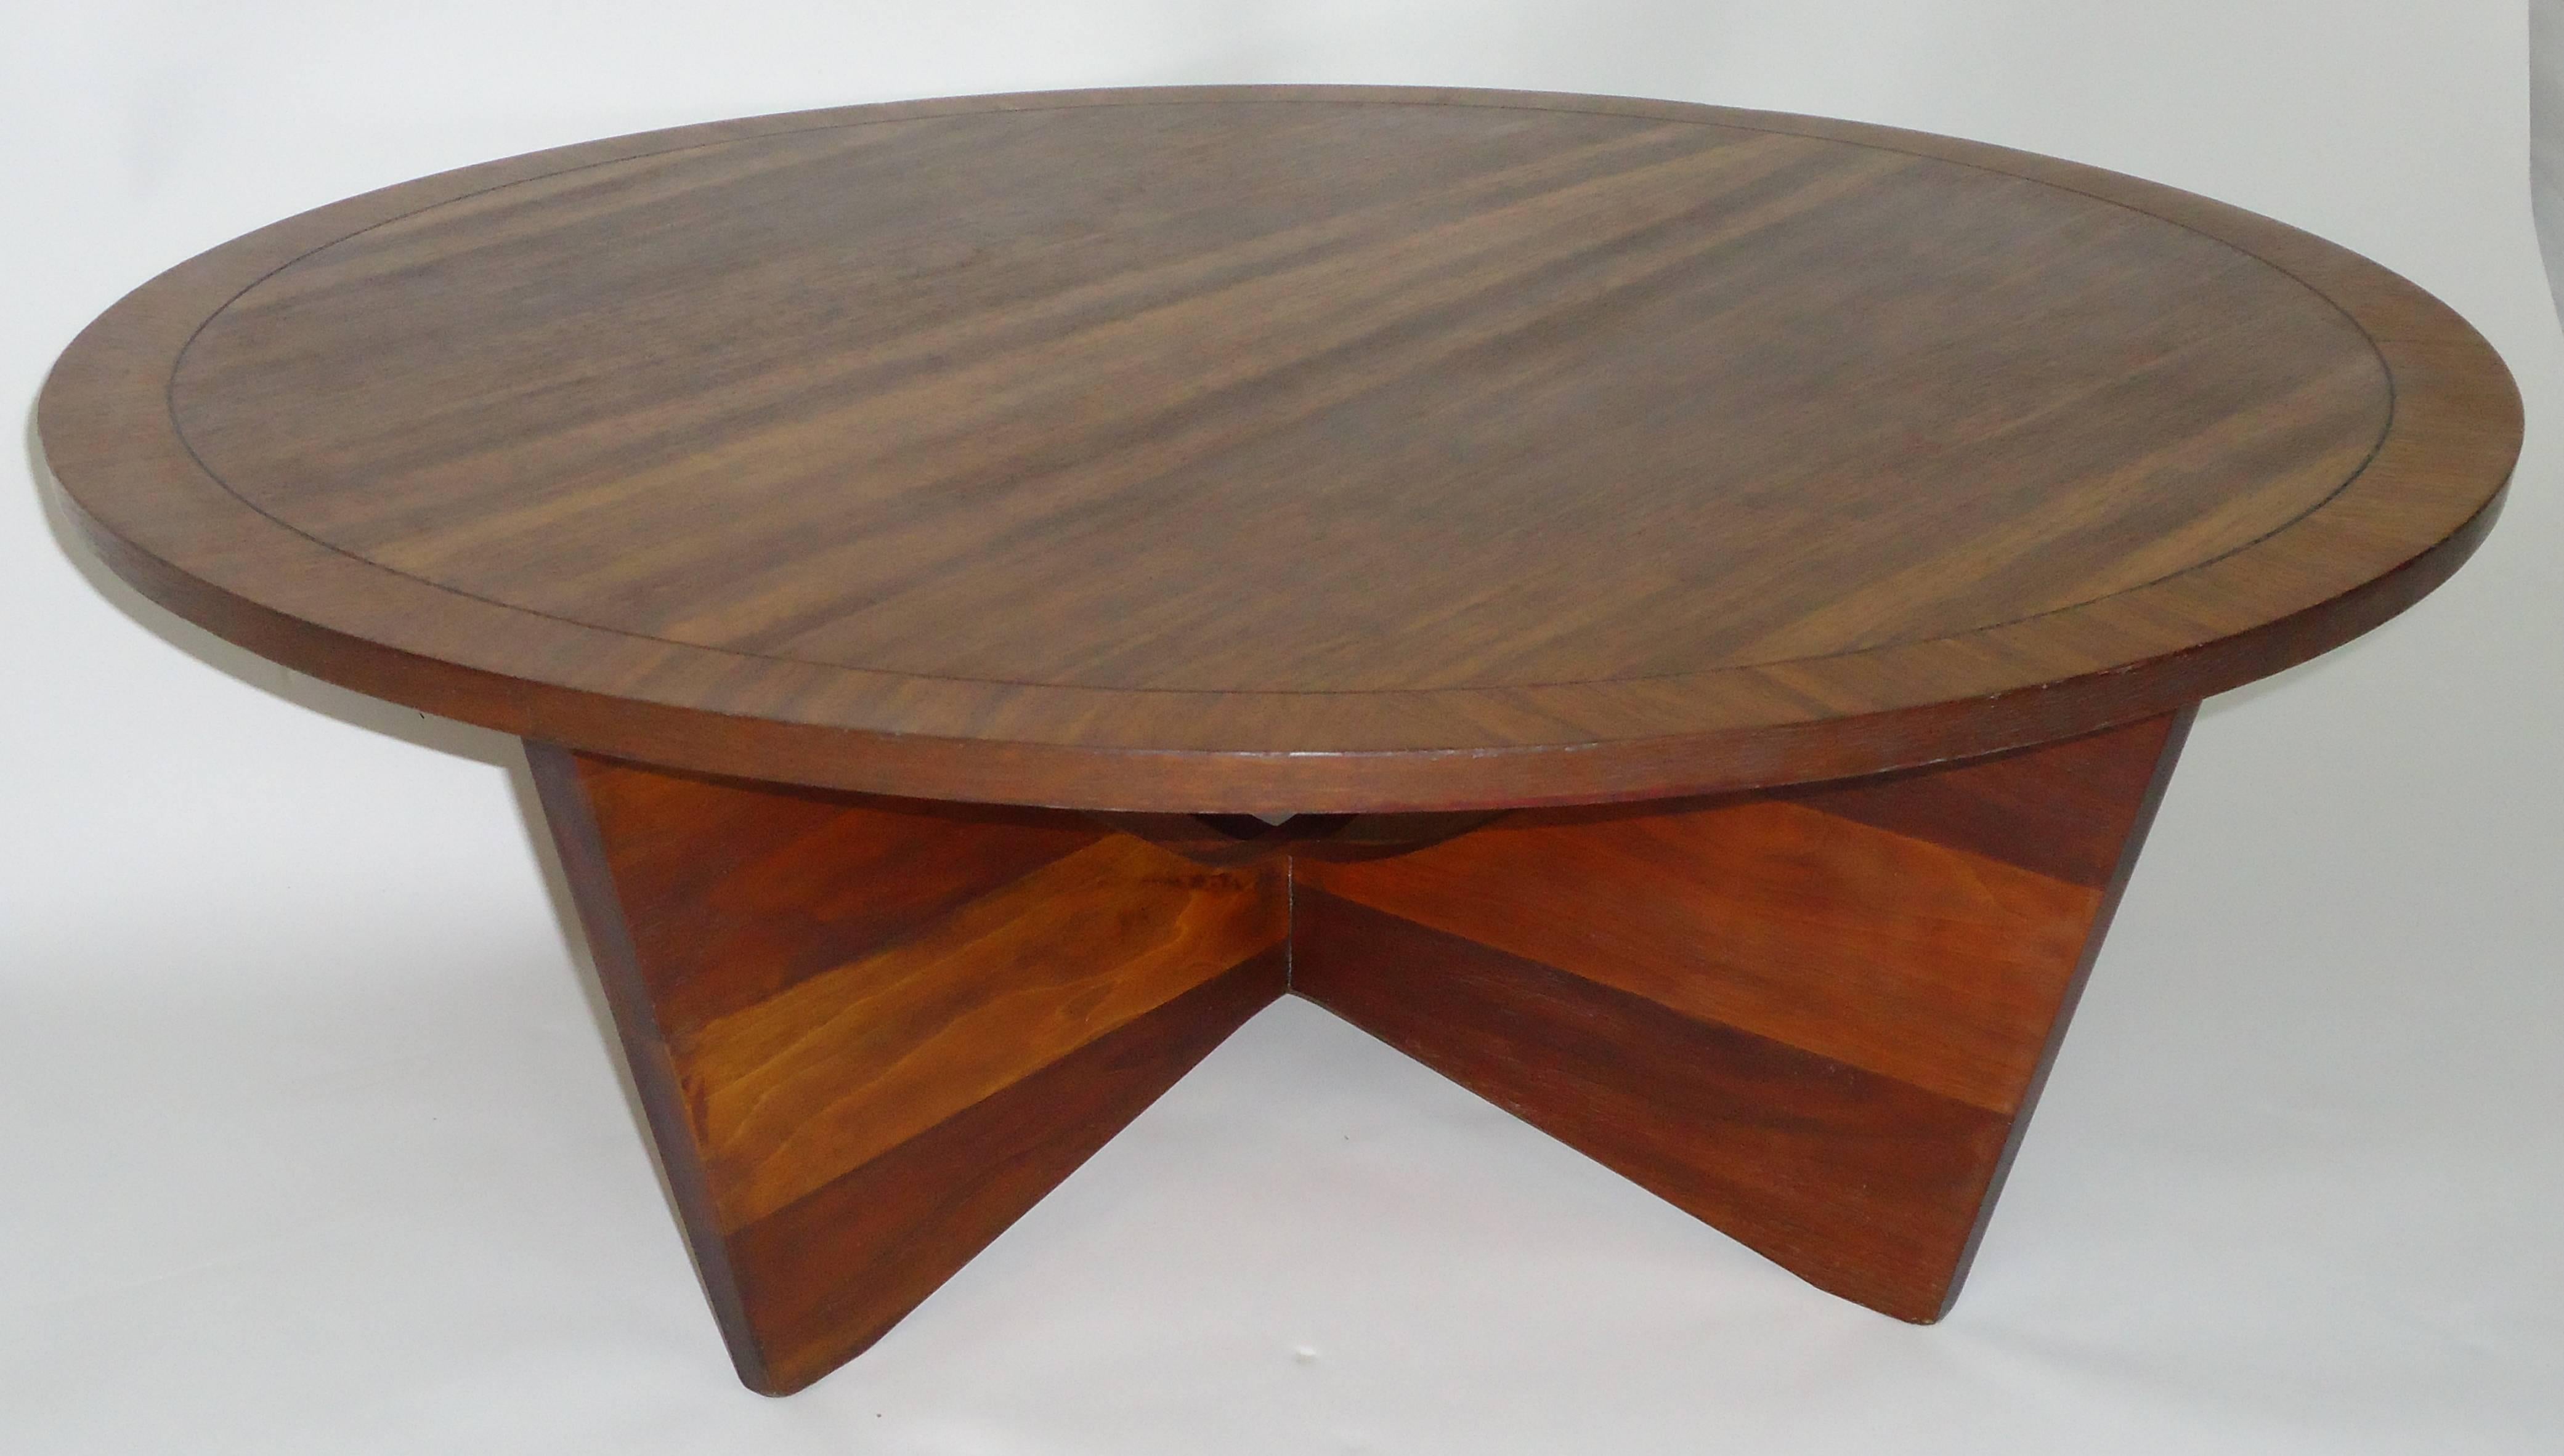 Rare George Nakashima walnut coffee table for his origins line for Widdicomb. Stamped George Nakashima, Stenciled 260 (model number) 11 /1 /60 and SUNDRA with a Widdicomb decal on the underside. 
The top is in excellent vintage condition with